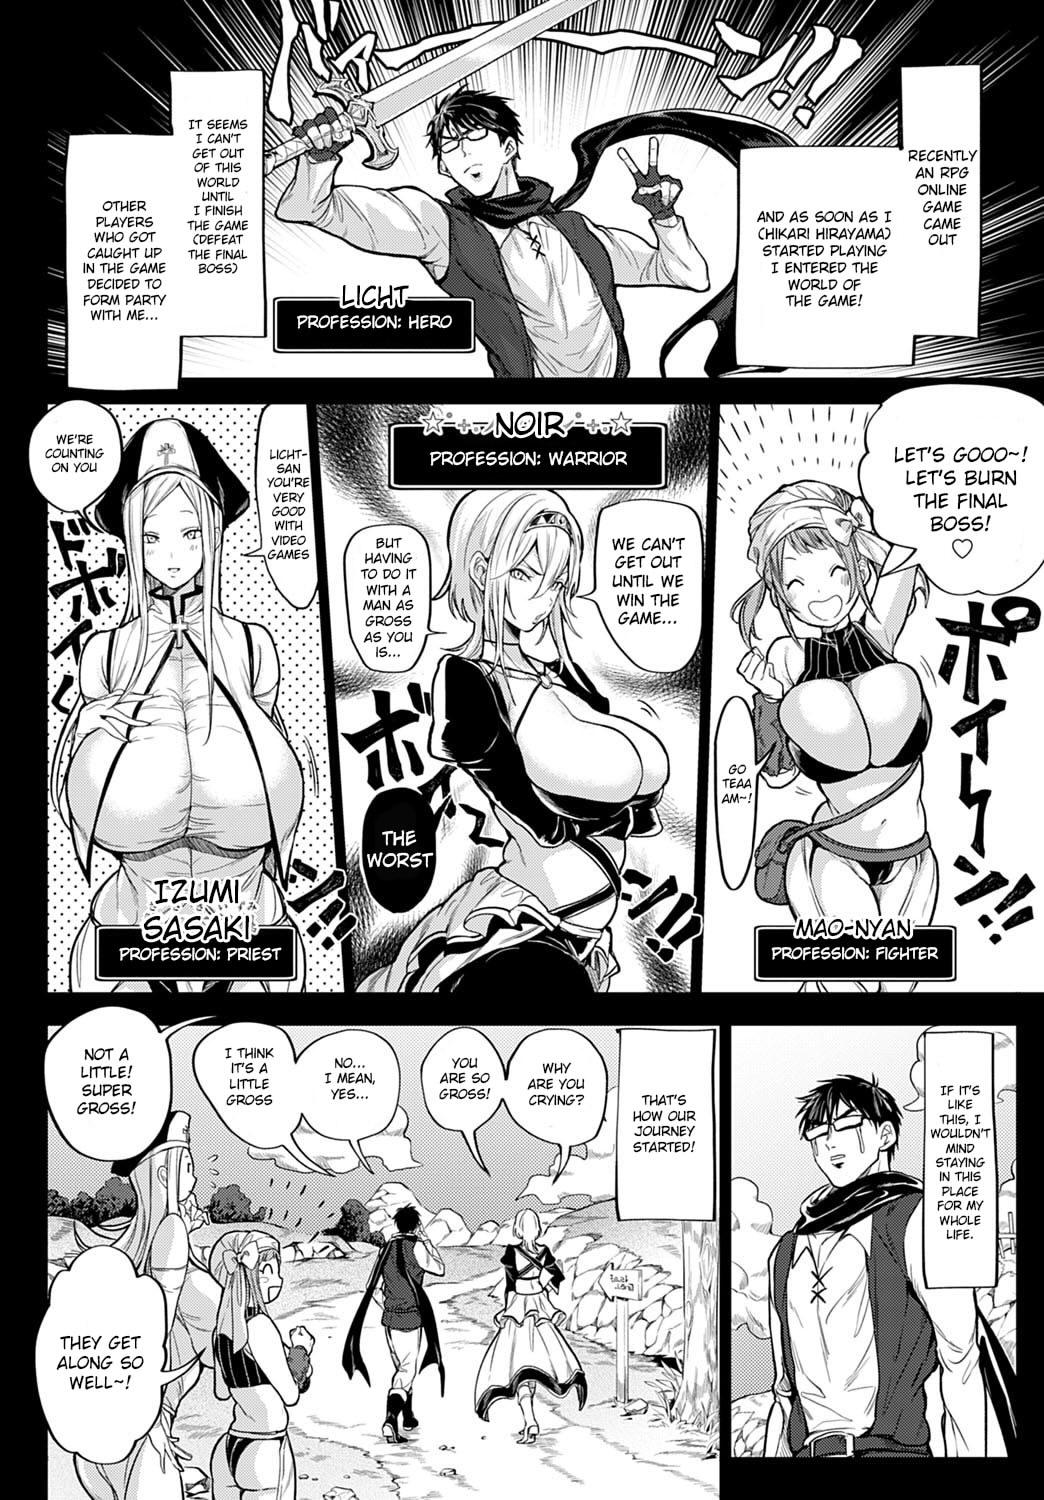 [Announ] Ore Saikyou Quest ~Isekai Harem no Sho~ | My story with my Harem in another world+Epilogue [English] [Digital] 2